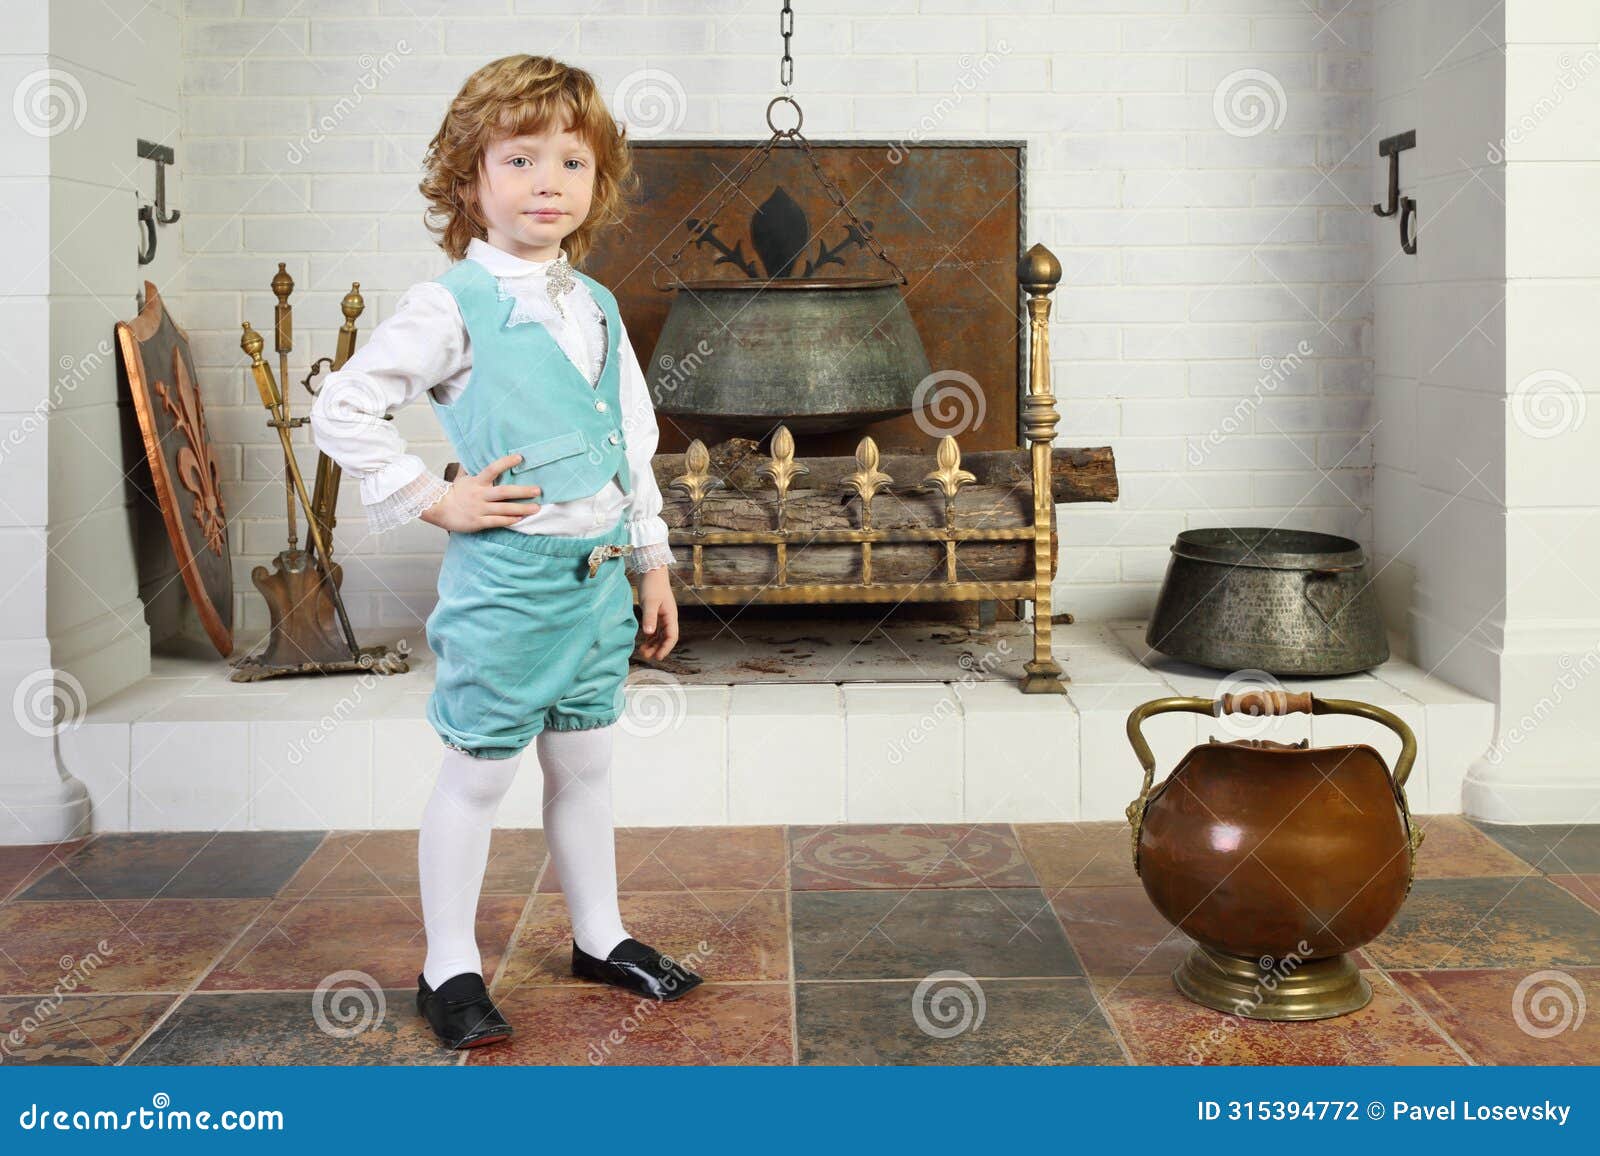 little boy in medieval costume stands near